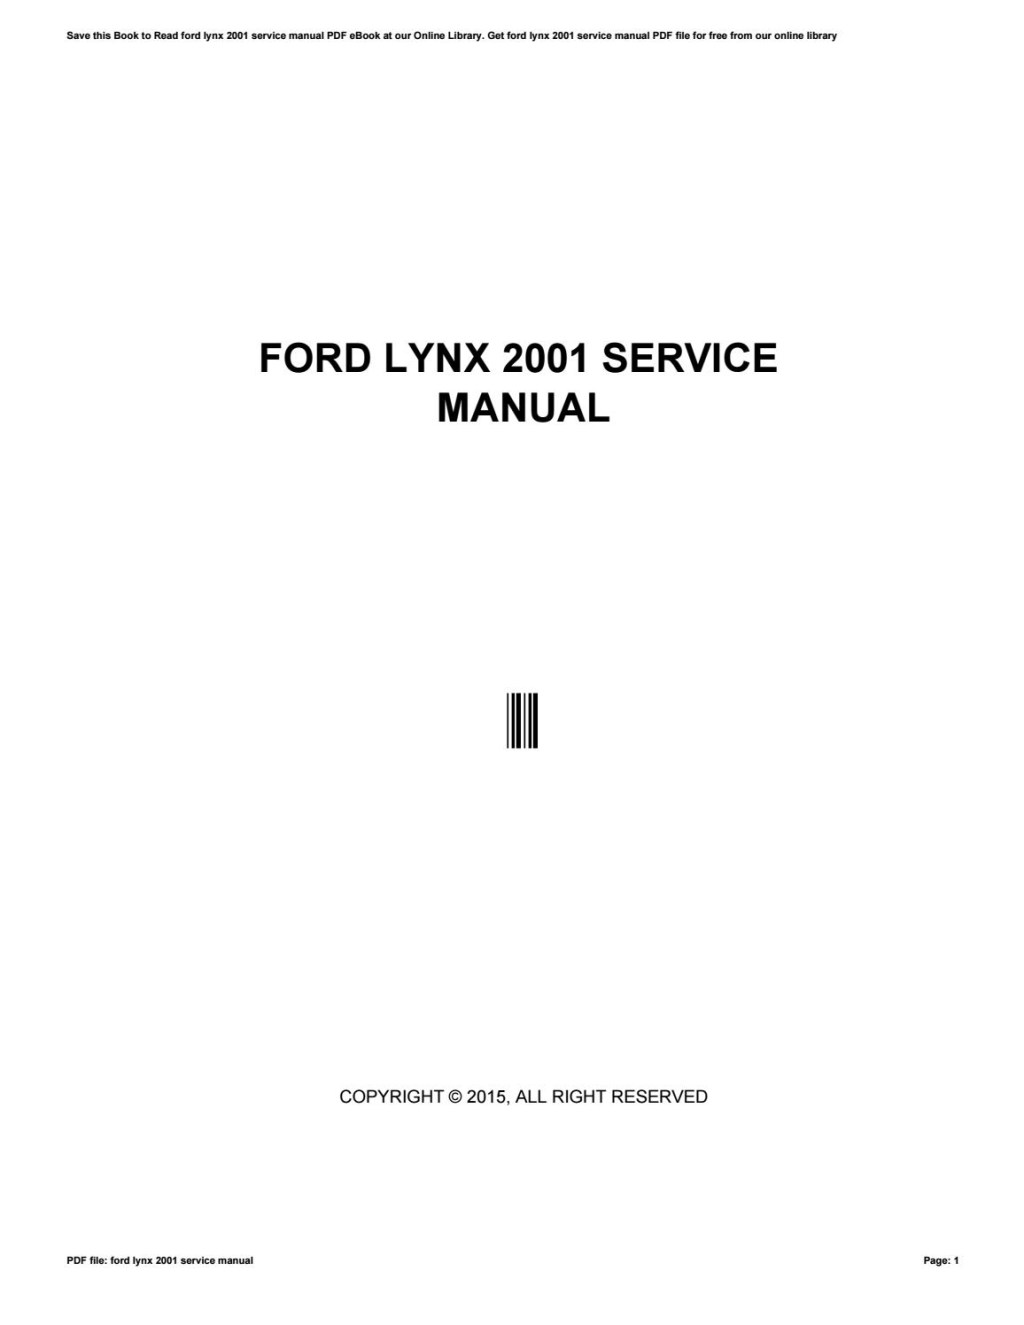 Picture of: Ford lynx  service manual by jakangabare – Issuu